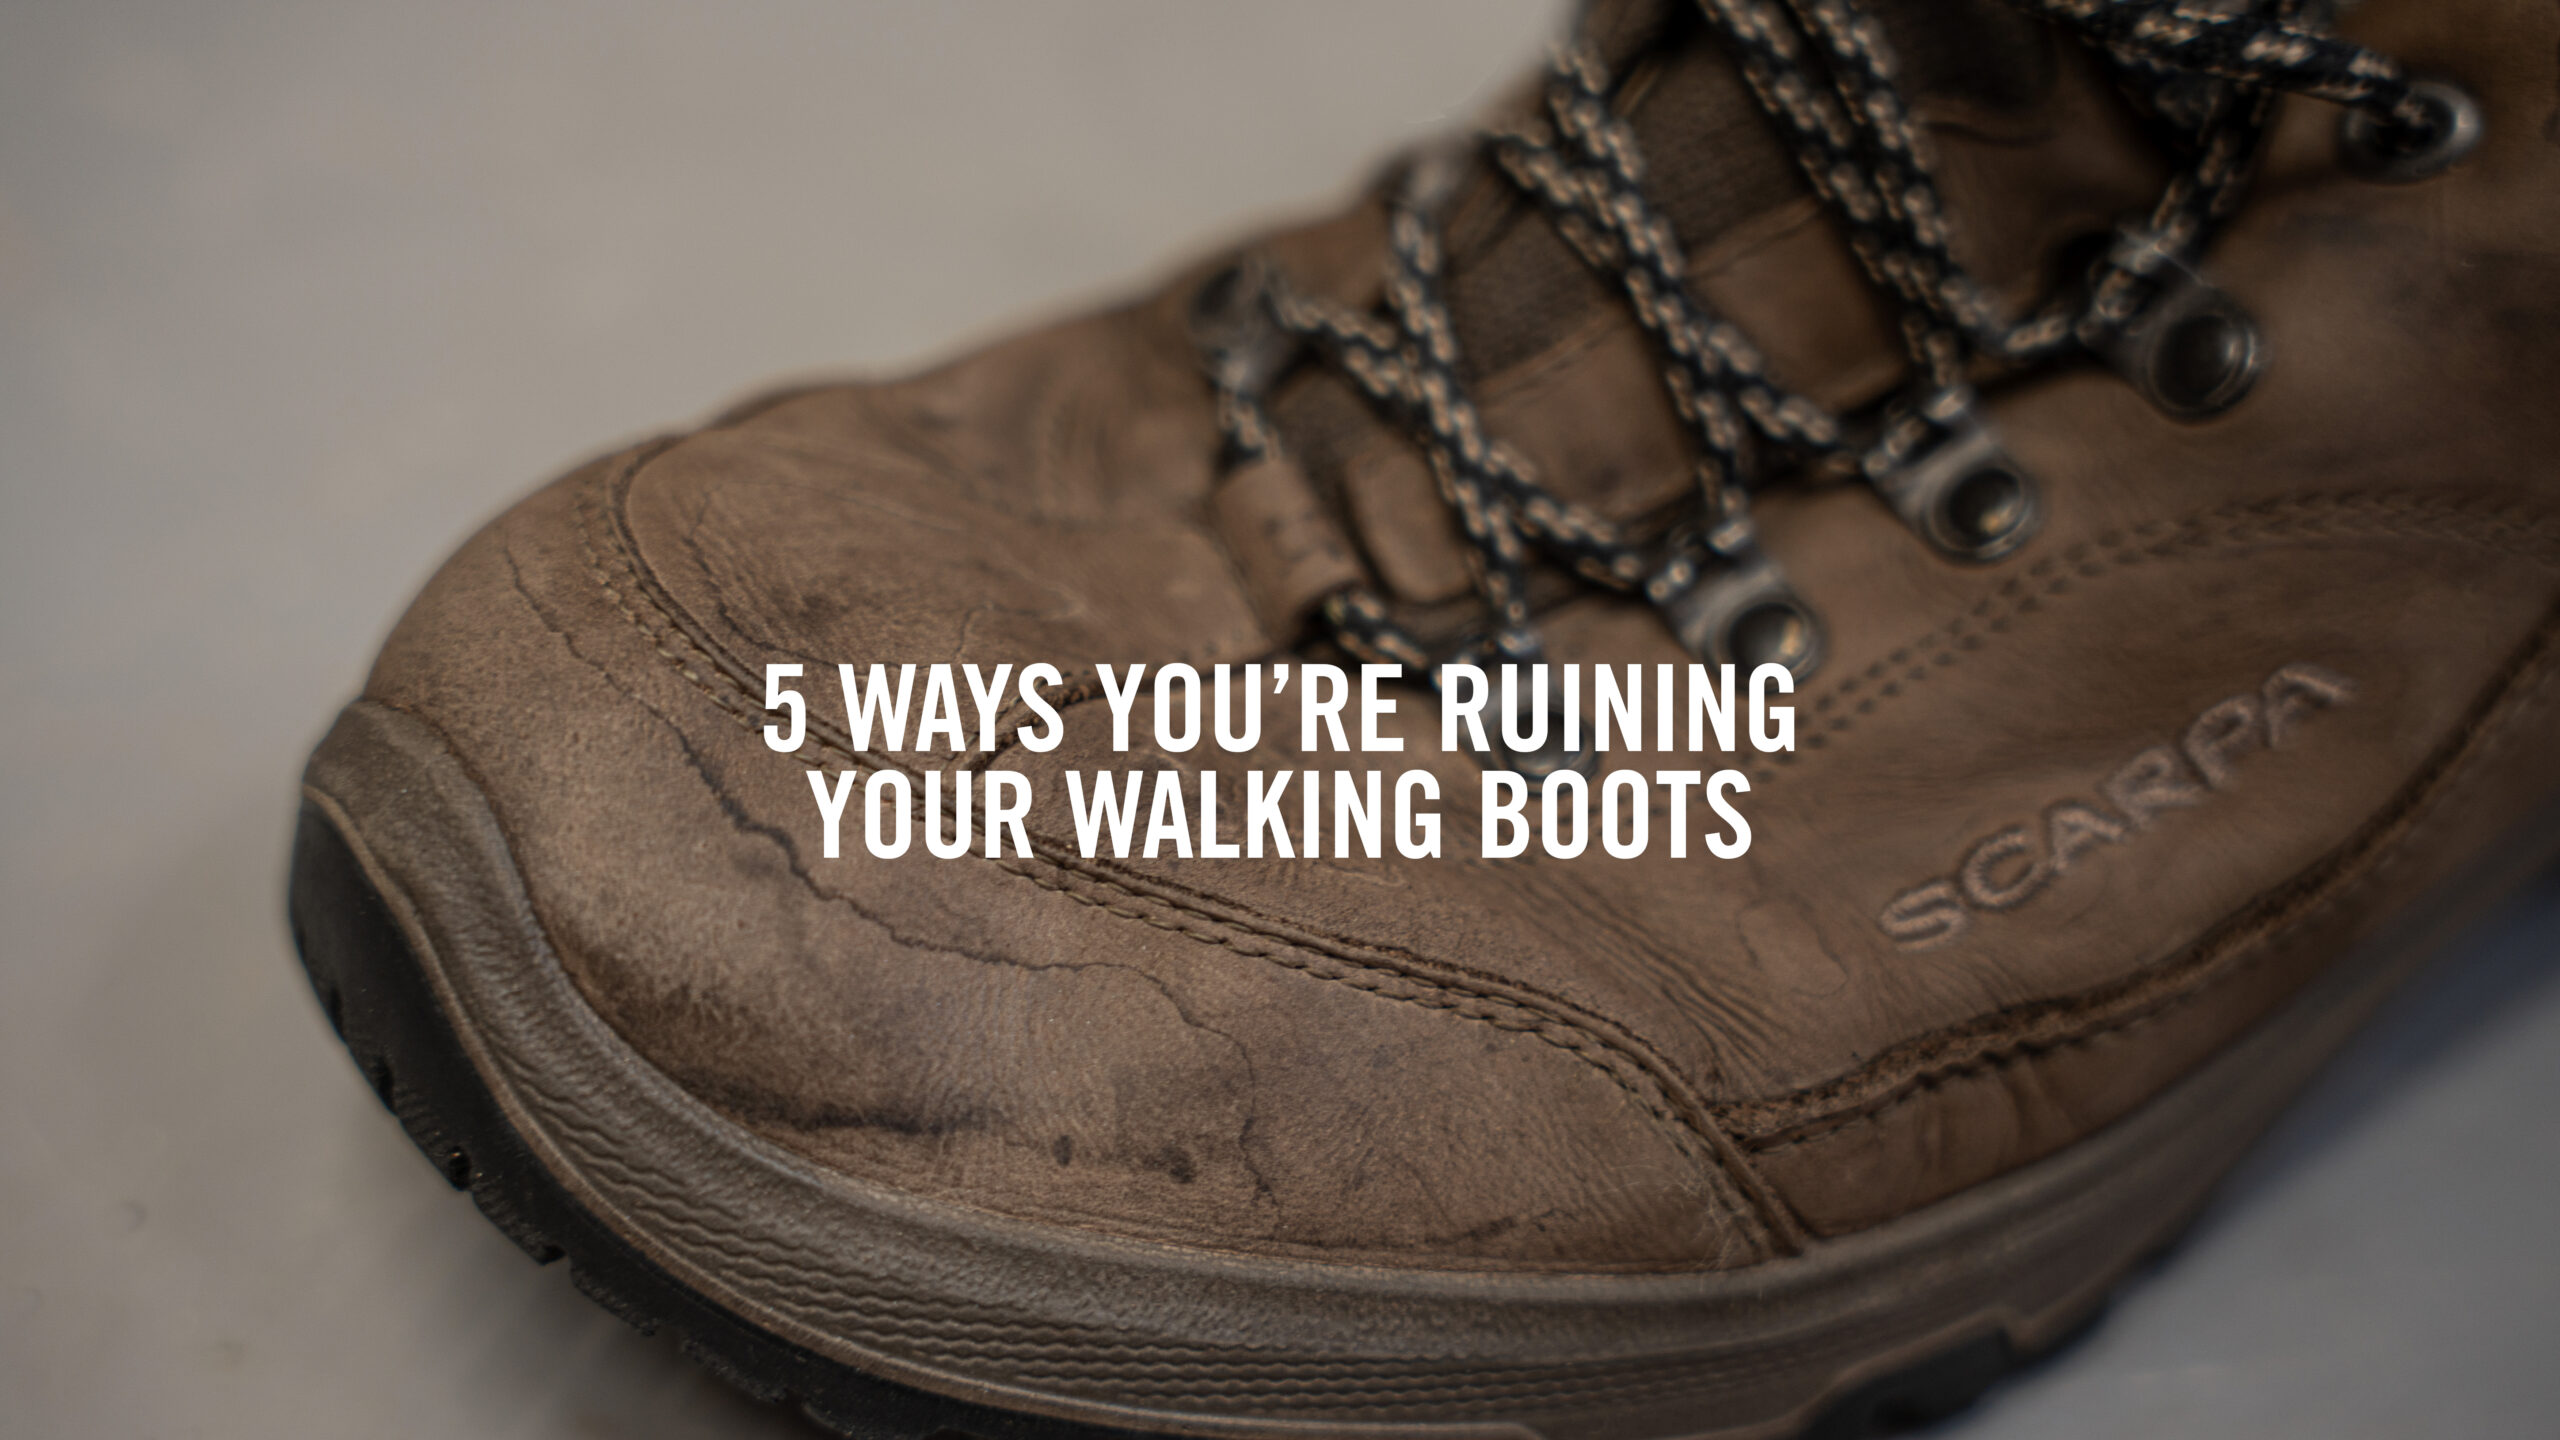 5 Ways You’re Ruining Your Walking Boots